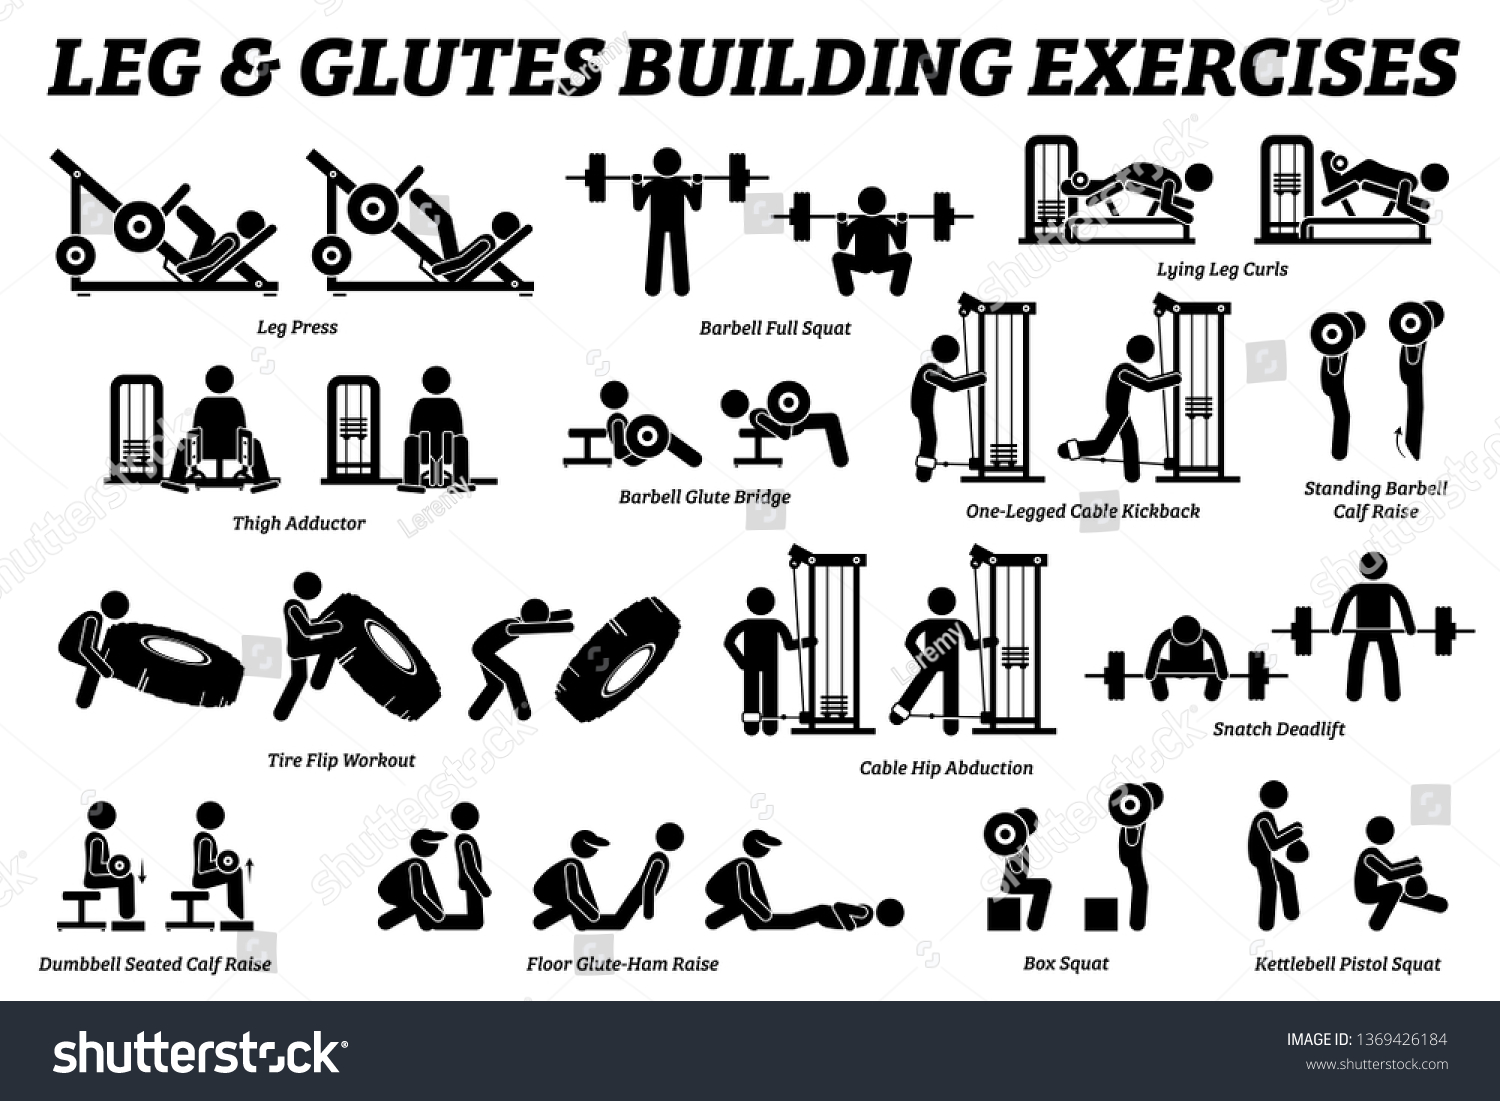 SVG of Legs and glutes building exercise and muscle building stick figure pictograms. Artworks depict set of weight training reps workout for legs and glutes by gym machine tools with instructions and steps. svg